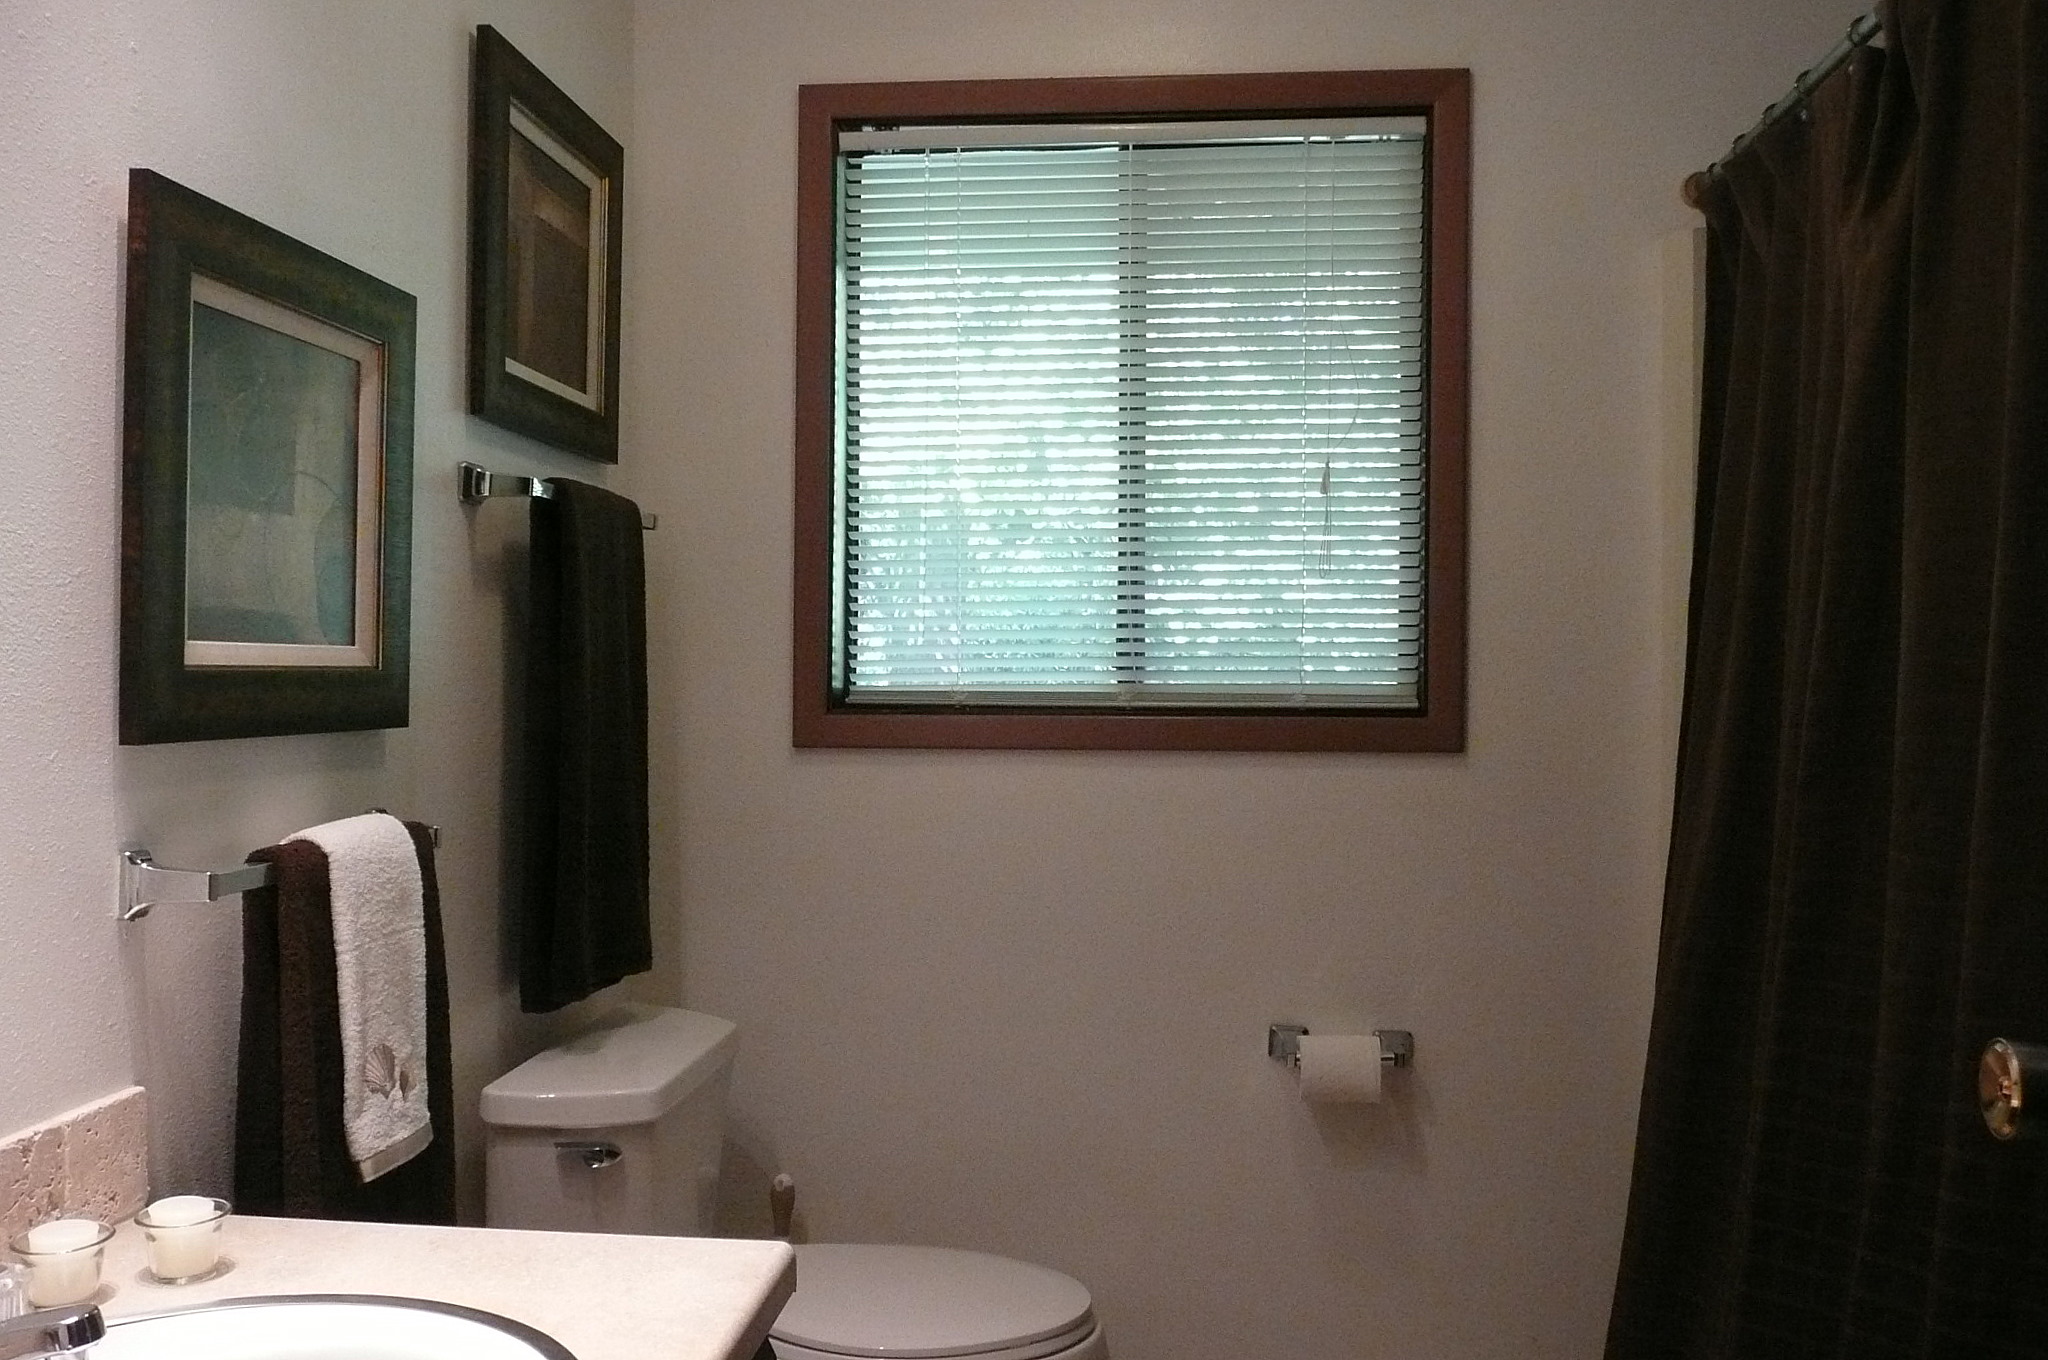 Bathroom after staging by Creative Concepts Home Staging